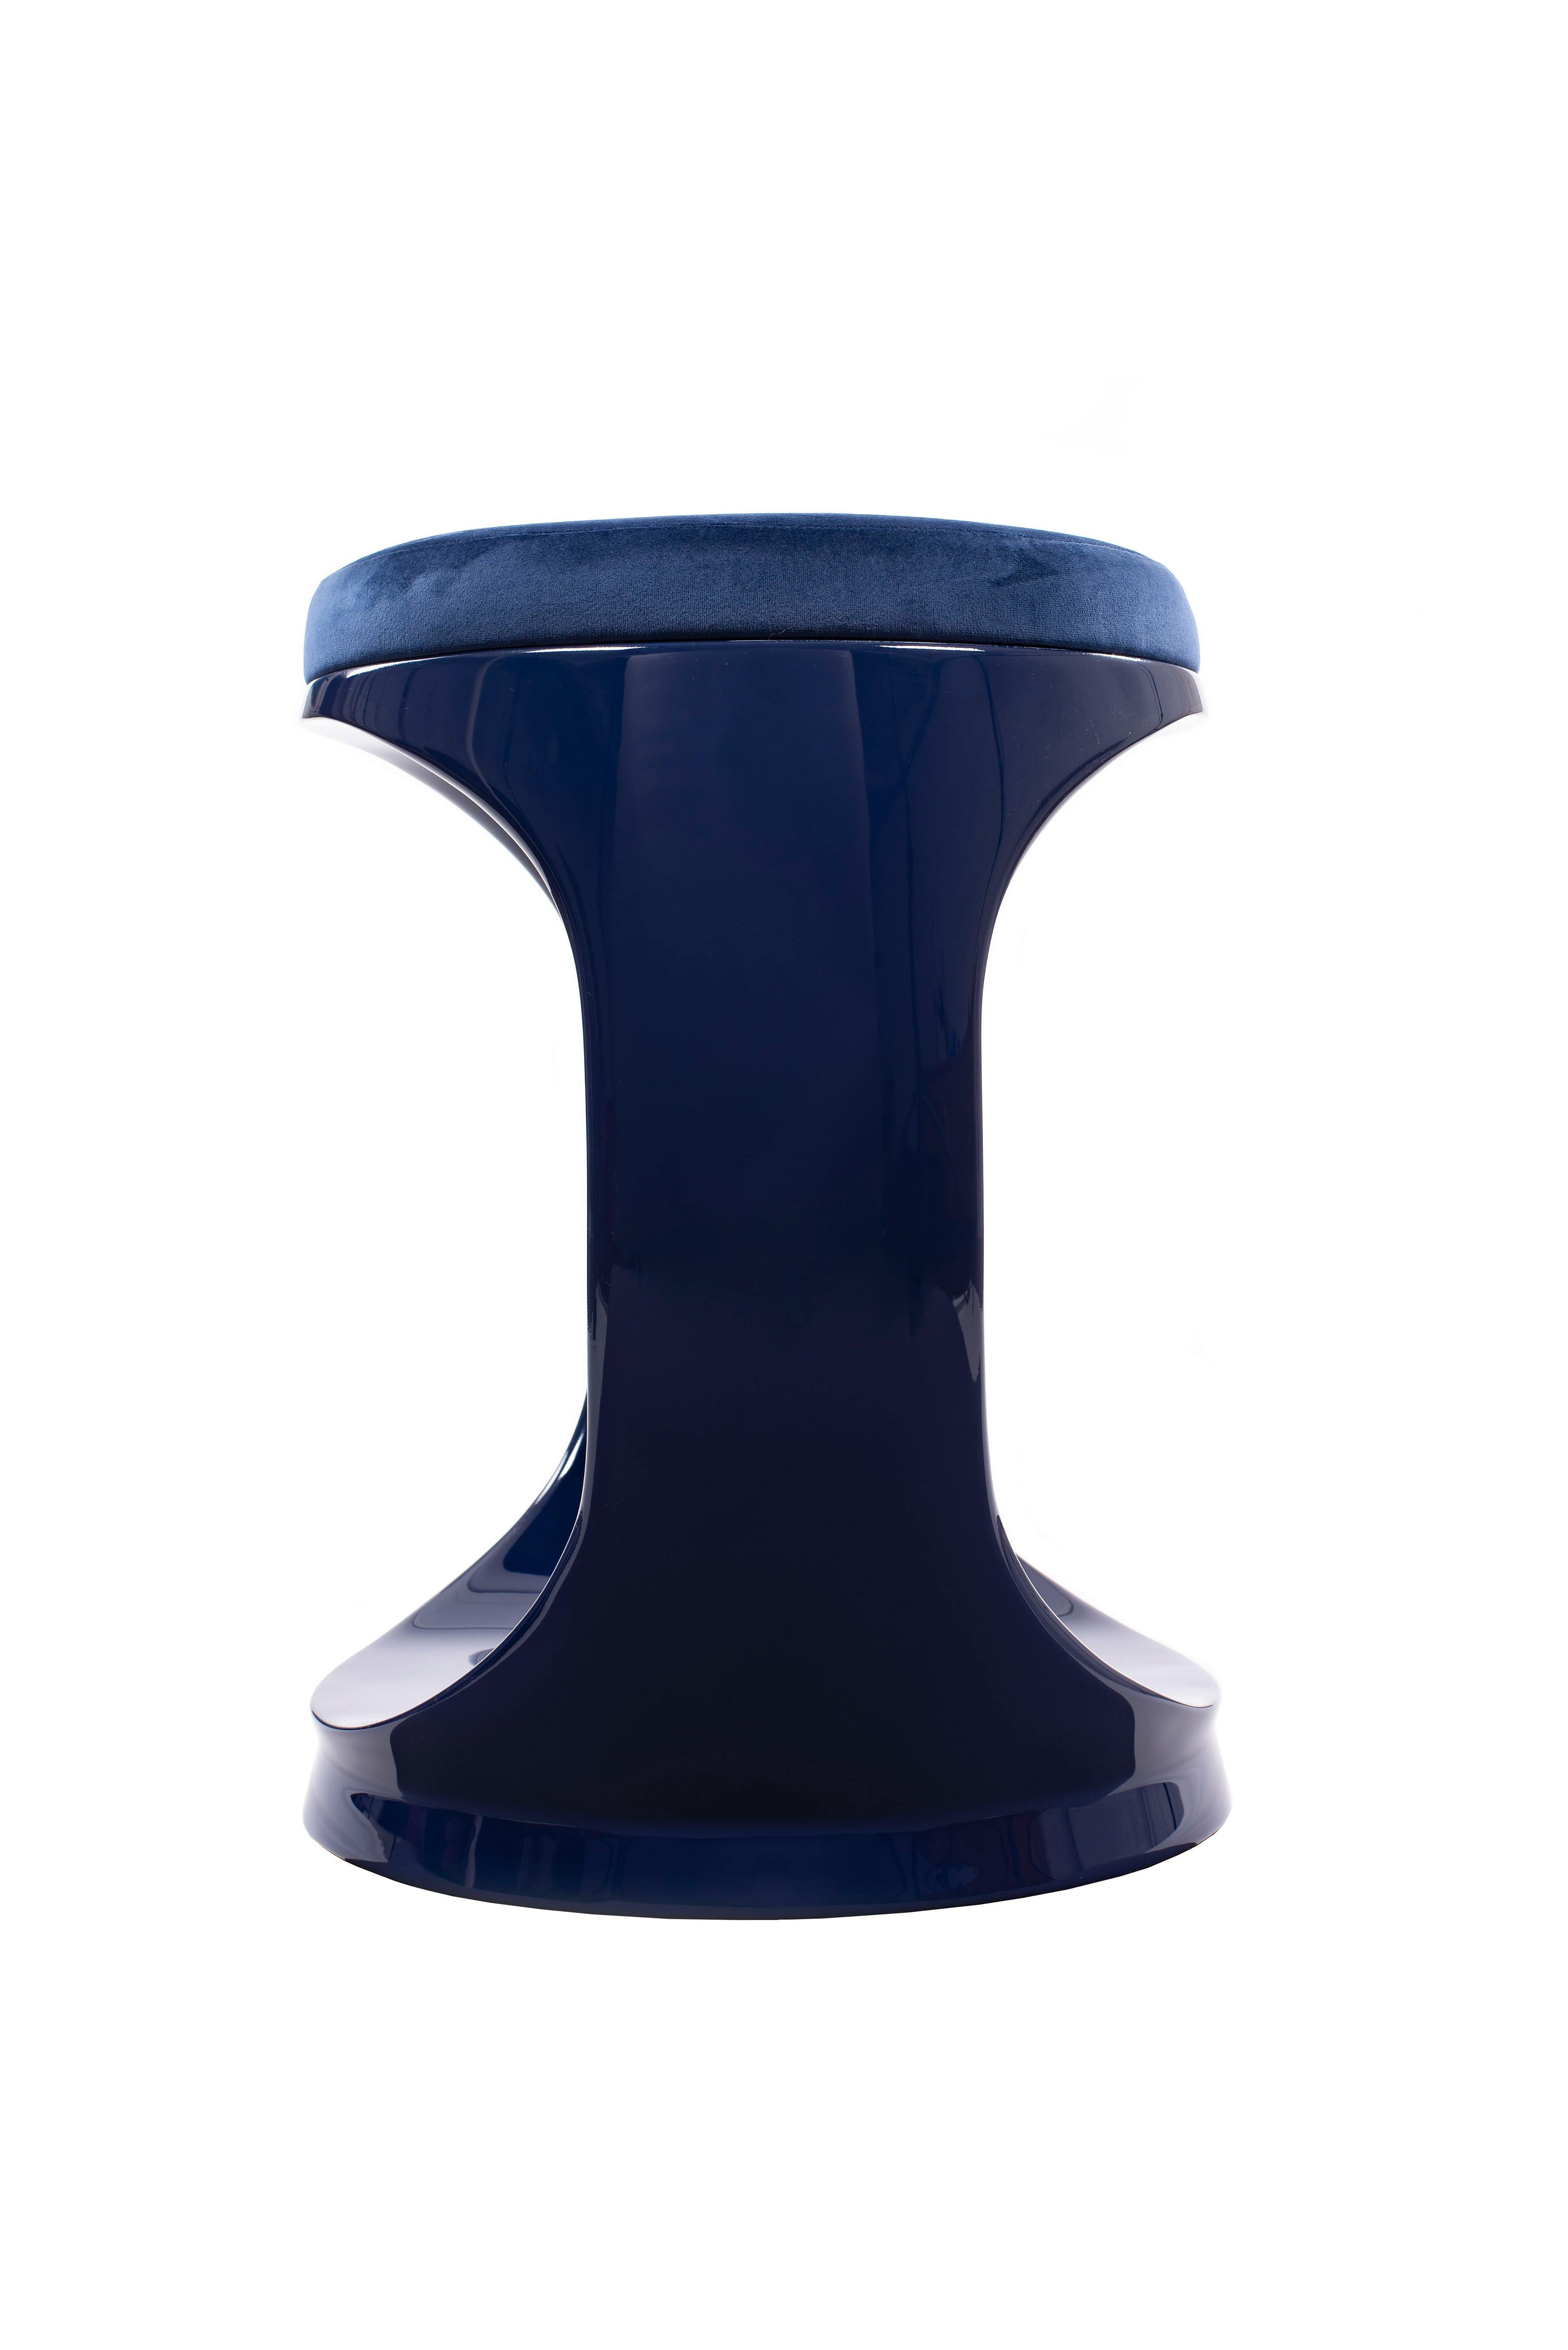 Organic Modern Contemporary Stool by Cyril Rumpler Signet Ring, Pouf Seats Navy Blue For Sale